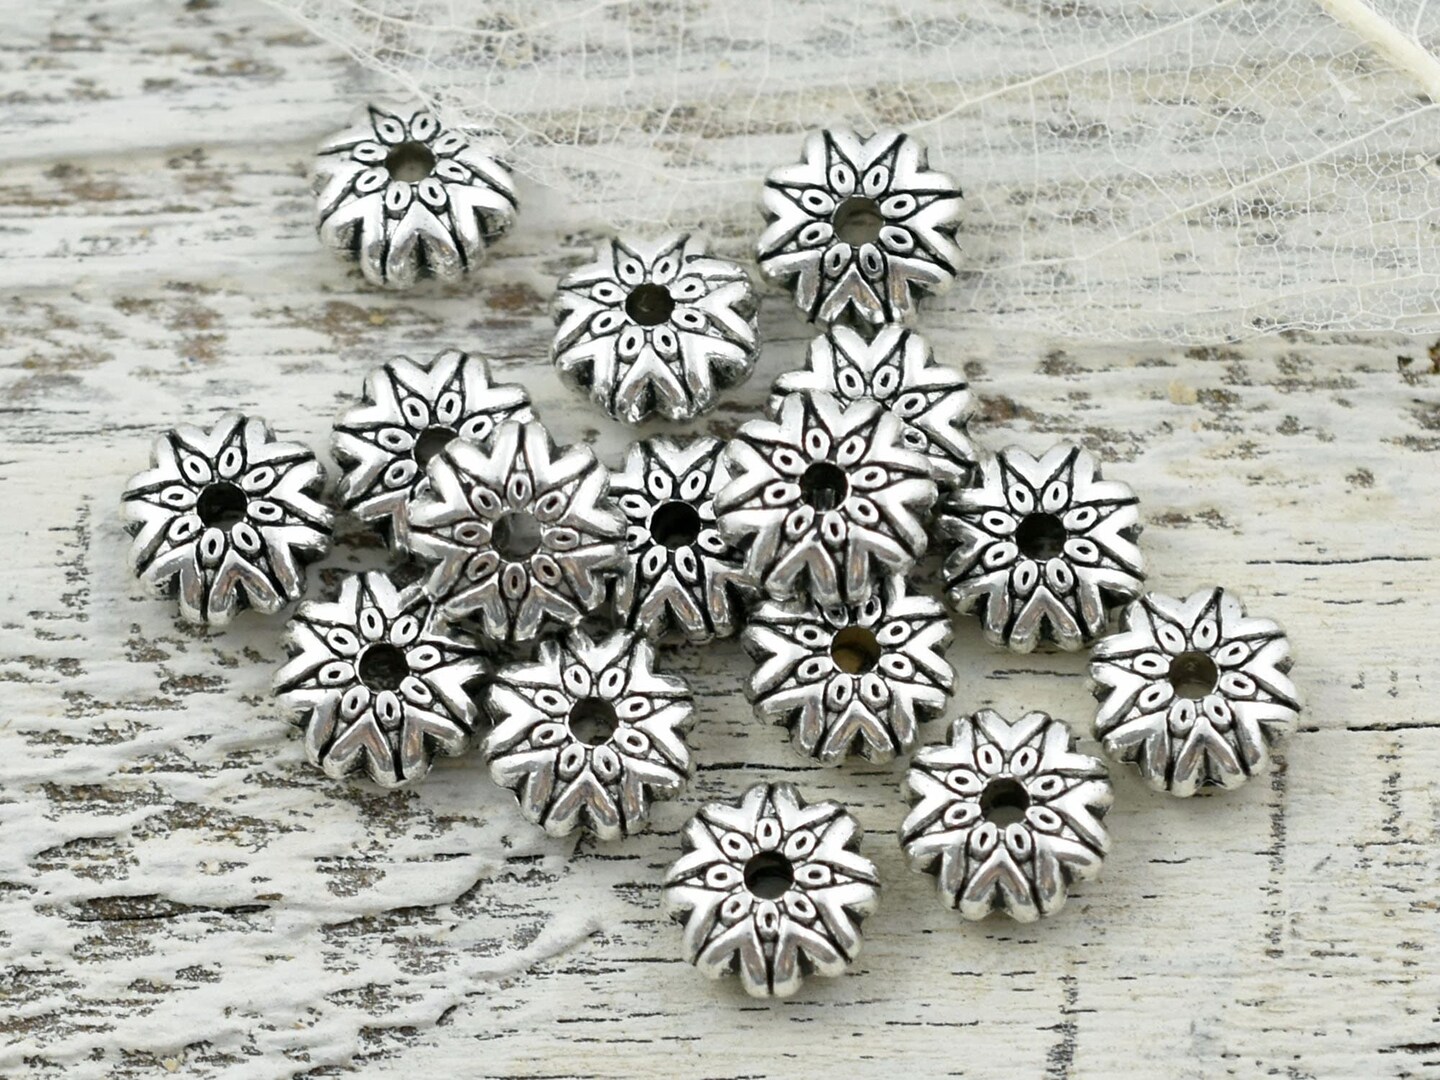 *25* 5x10mm Antique Silver Rondelle Star Spacer Beads